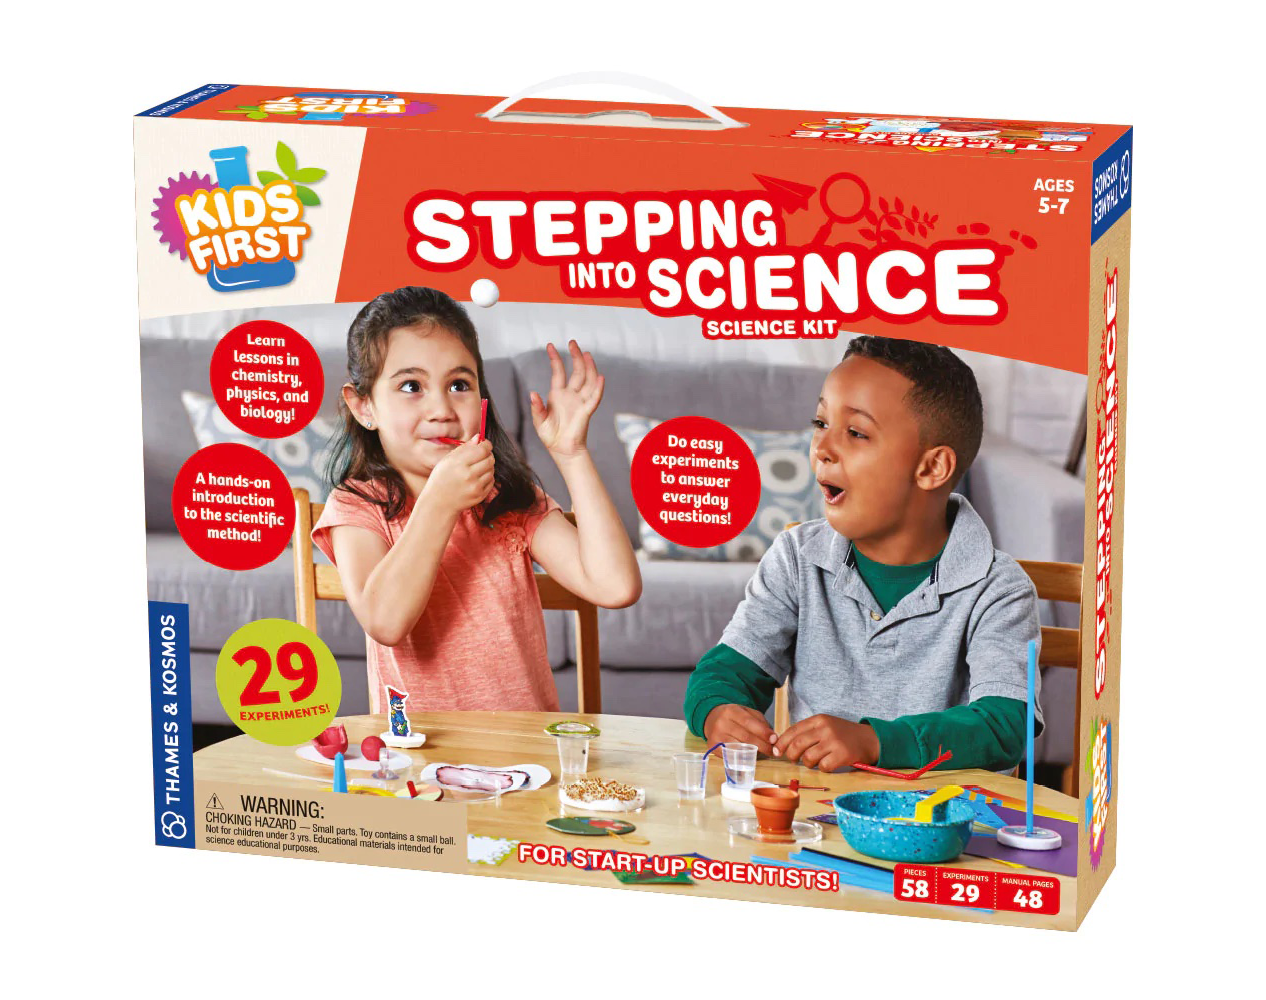 Kids First Math: Linking Cubes Math Kit with Activity Cards – Thames &  Kosmos